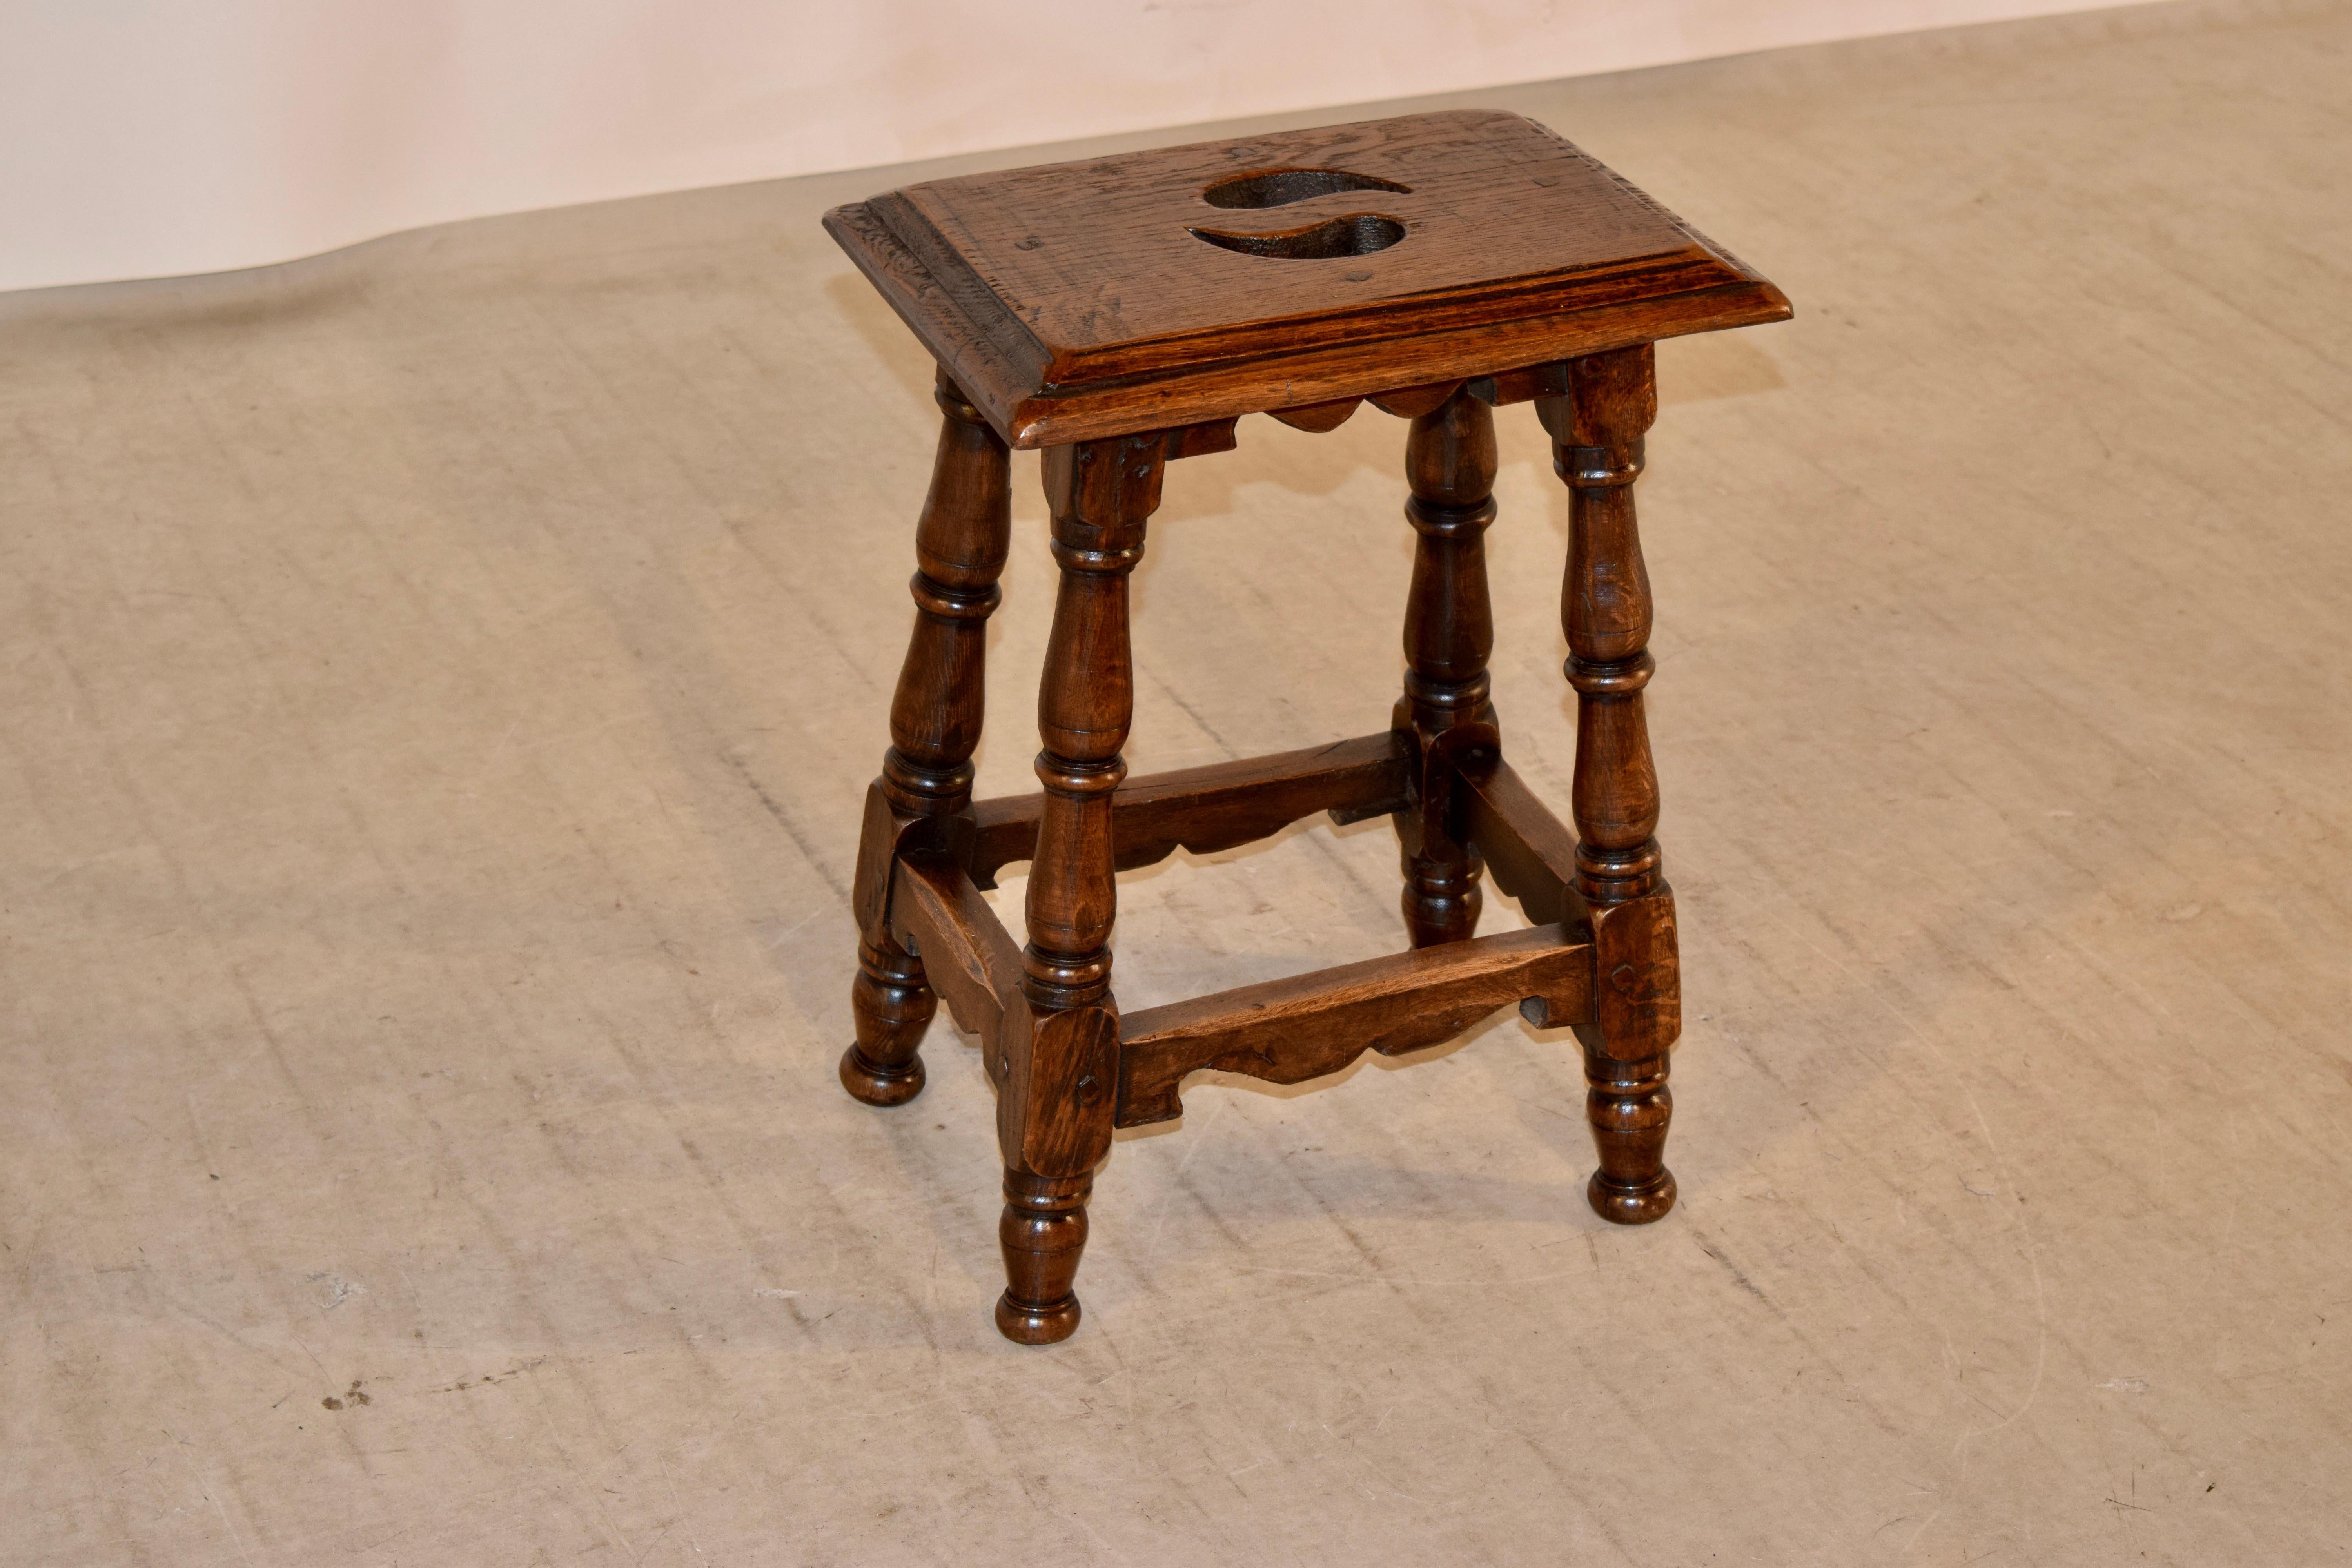 19th century walnut stool from France with a wonderfully thick top which has a handle design cutout of the top and a multi-level beveled edge, following down to a lovely hand scalloped apron and hand-turned splayed legs joined by hand scalloped